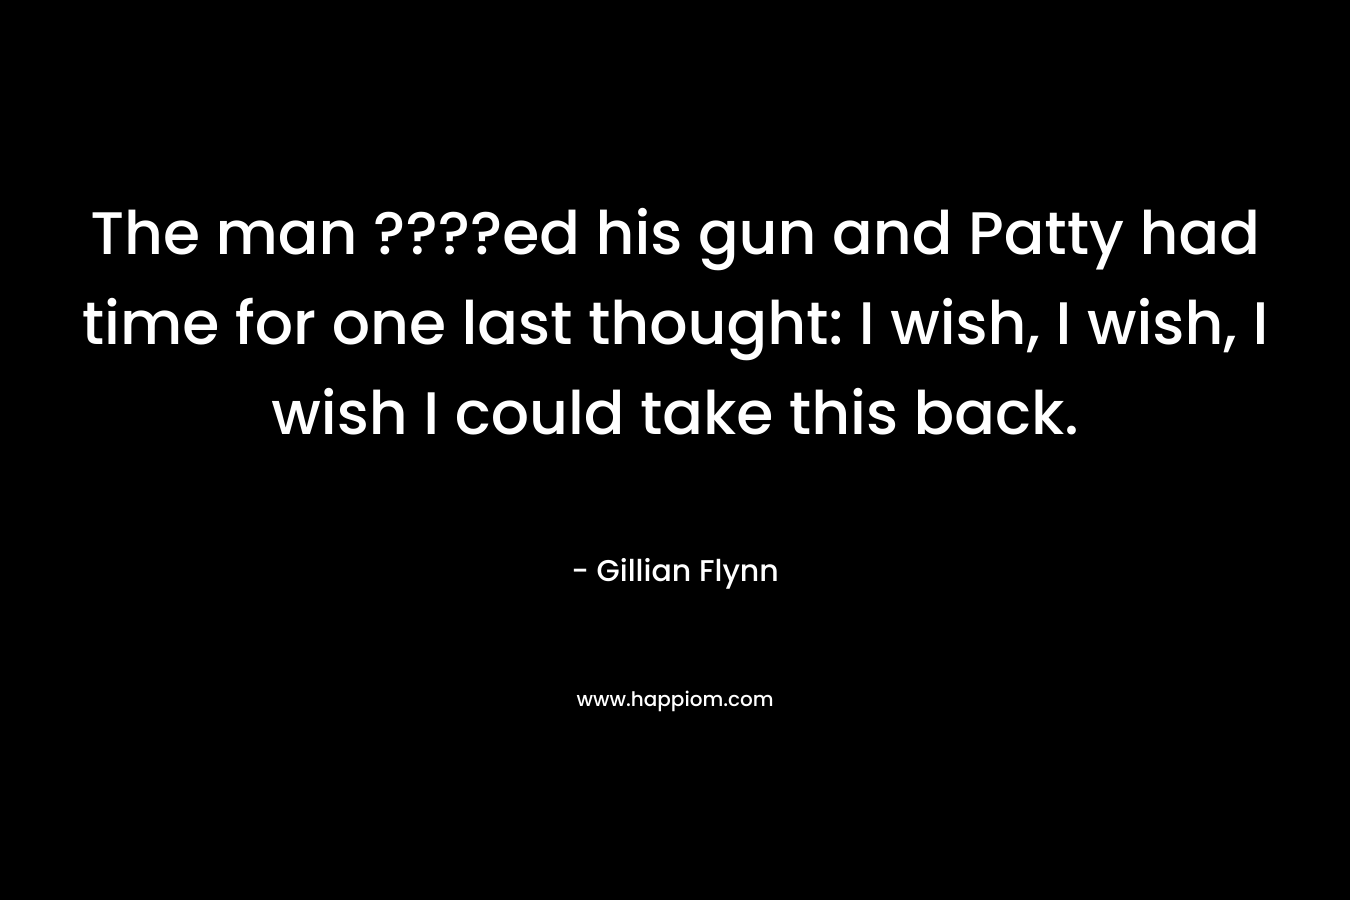 The man ????ed his gun and Patty had time for one last thought: I wish, I wish, I wish I could take this back. – Gillian Flynn